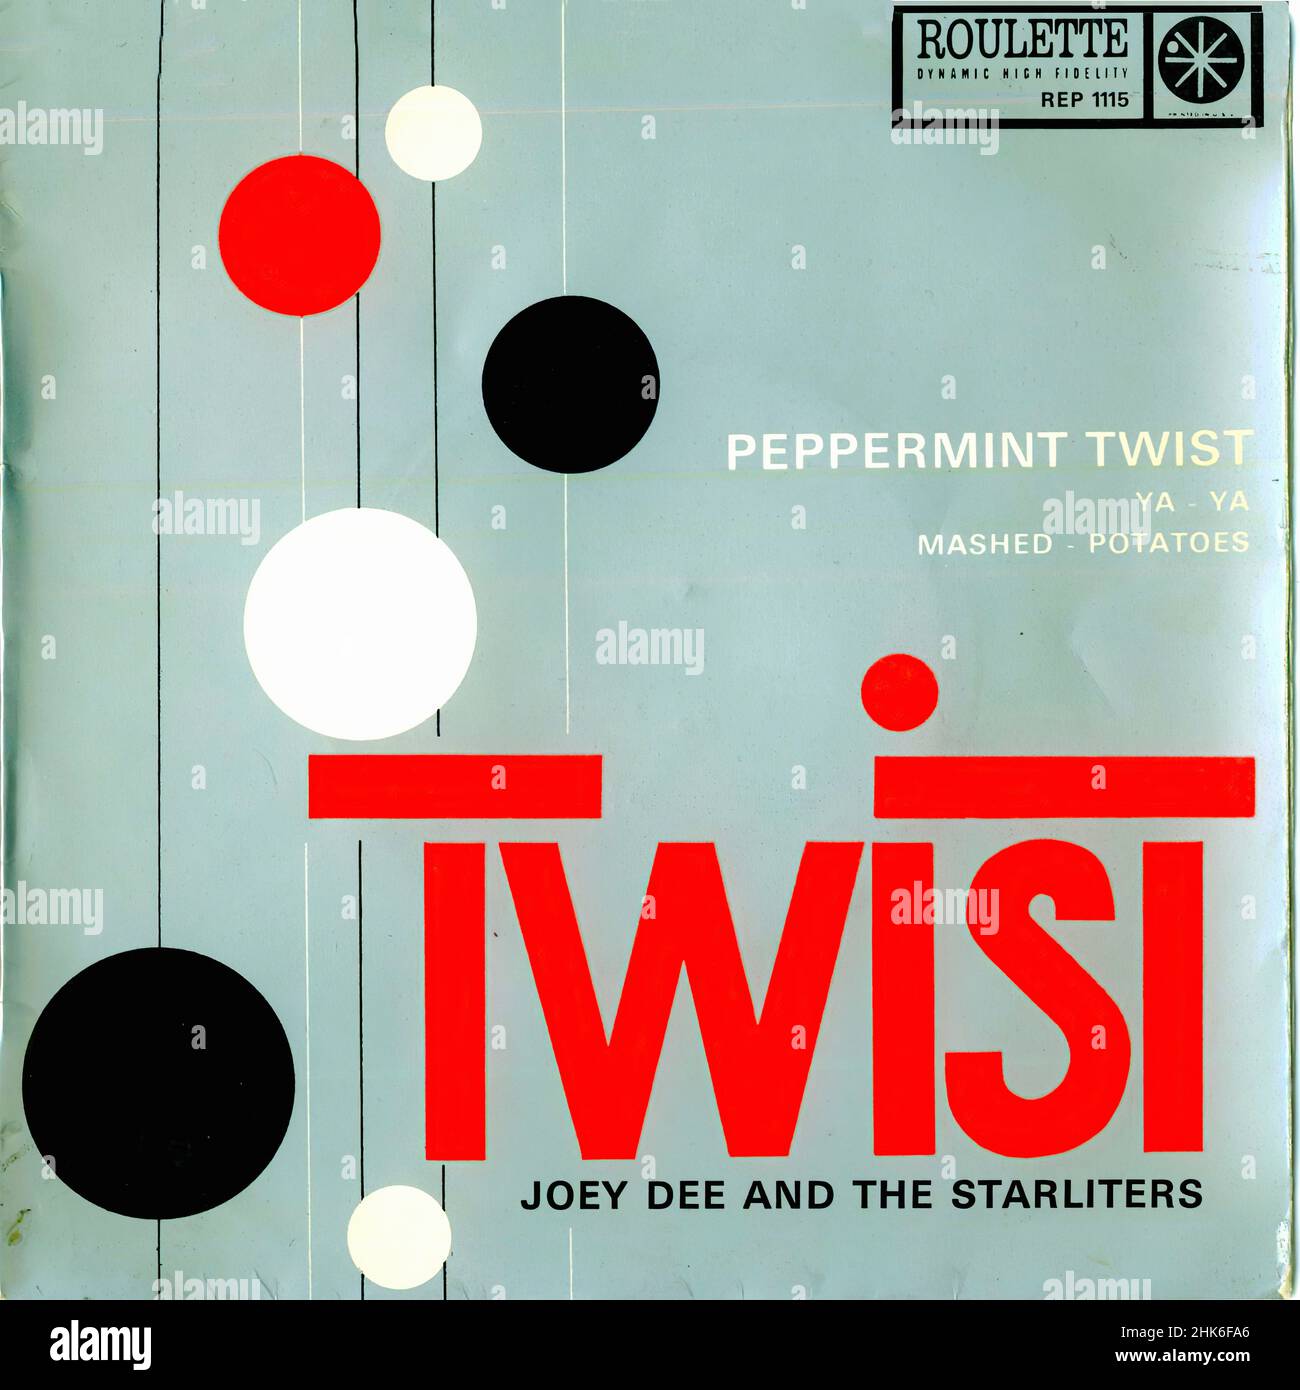 Vintage vinyl record cover -  Dee, Joey & The Starlighters - Twist - F - EP - 1963 Stock Photo